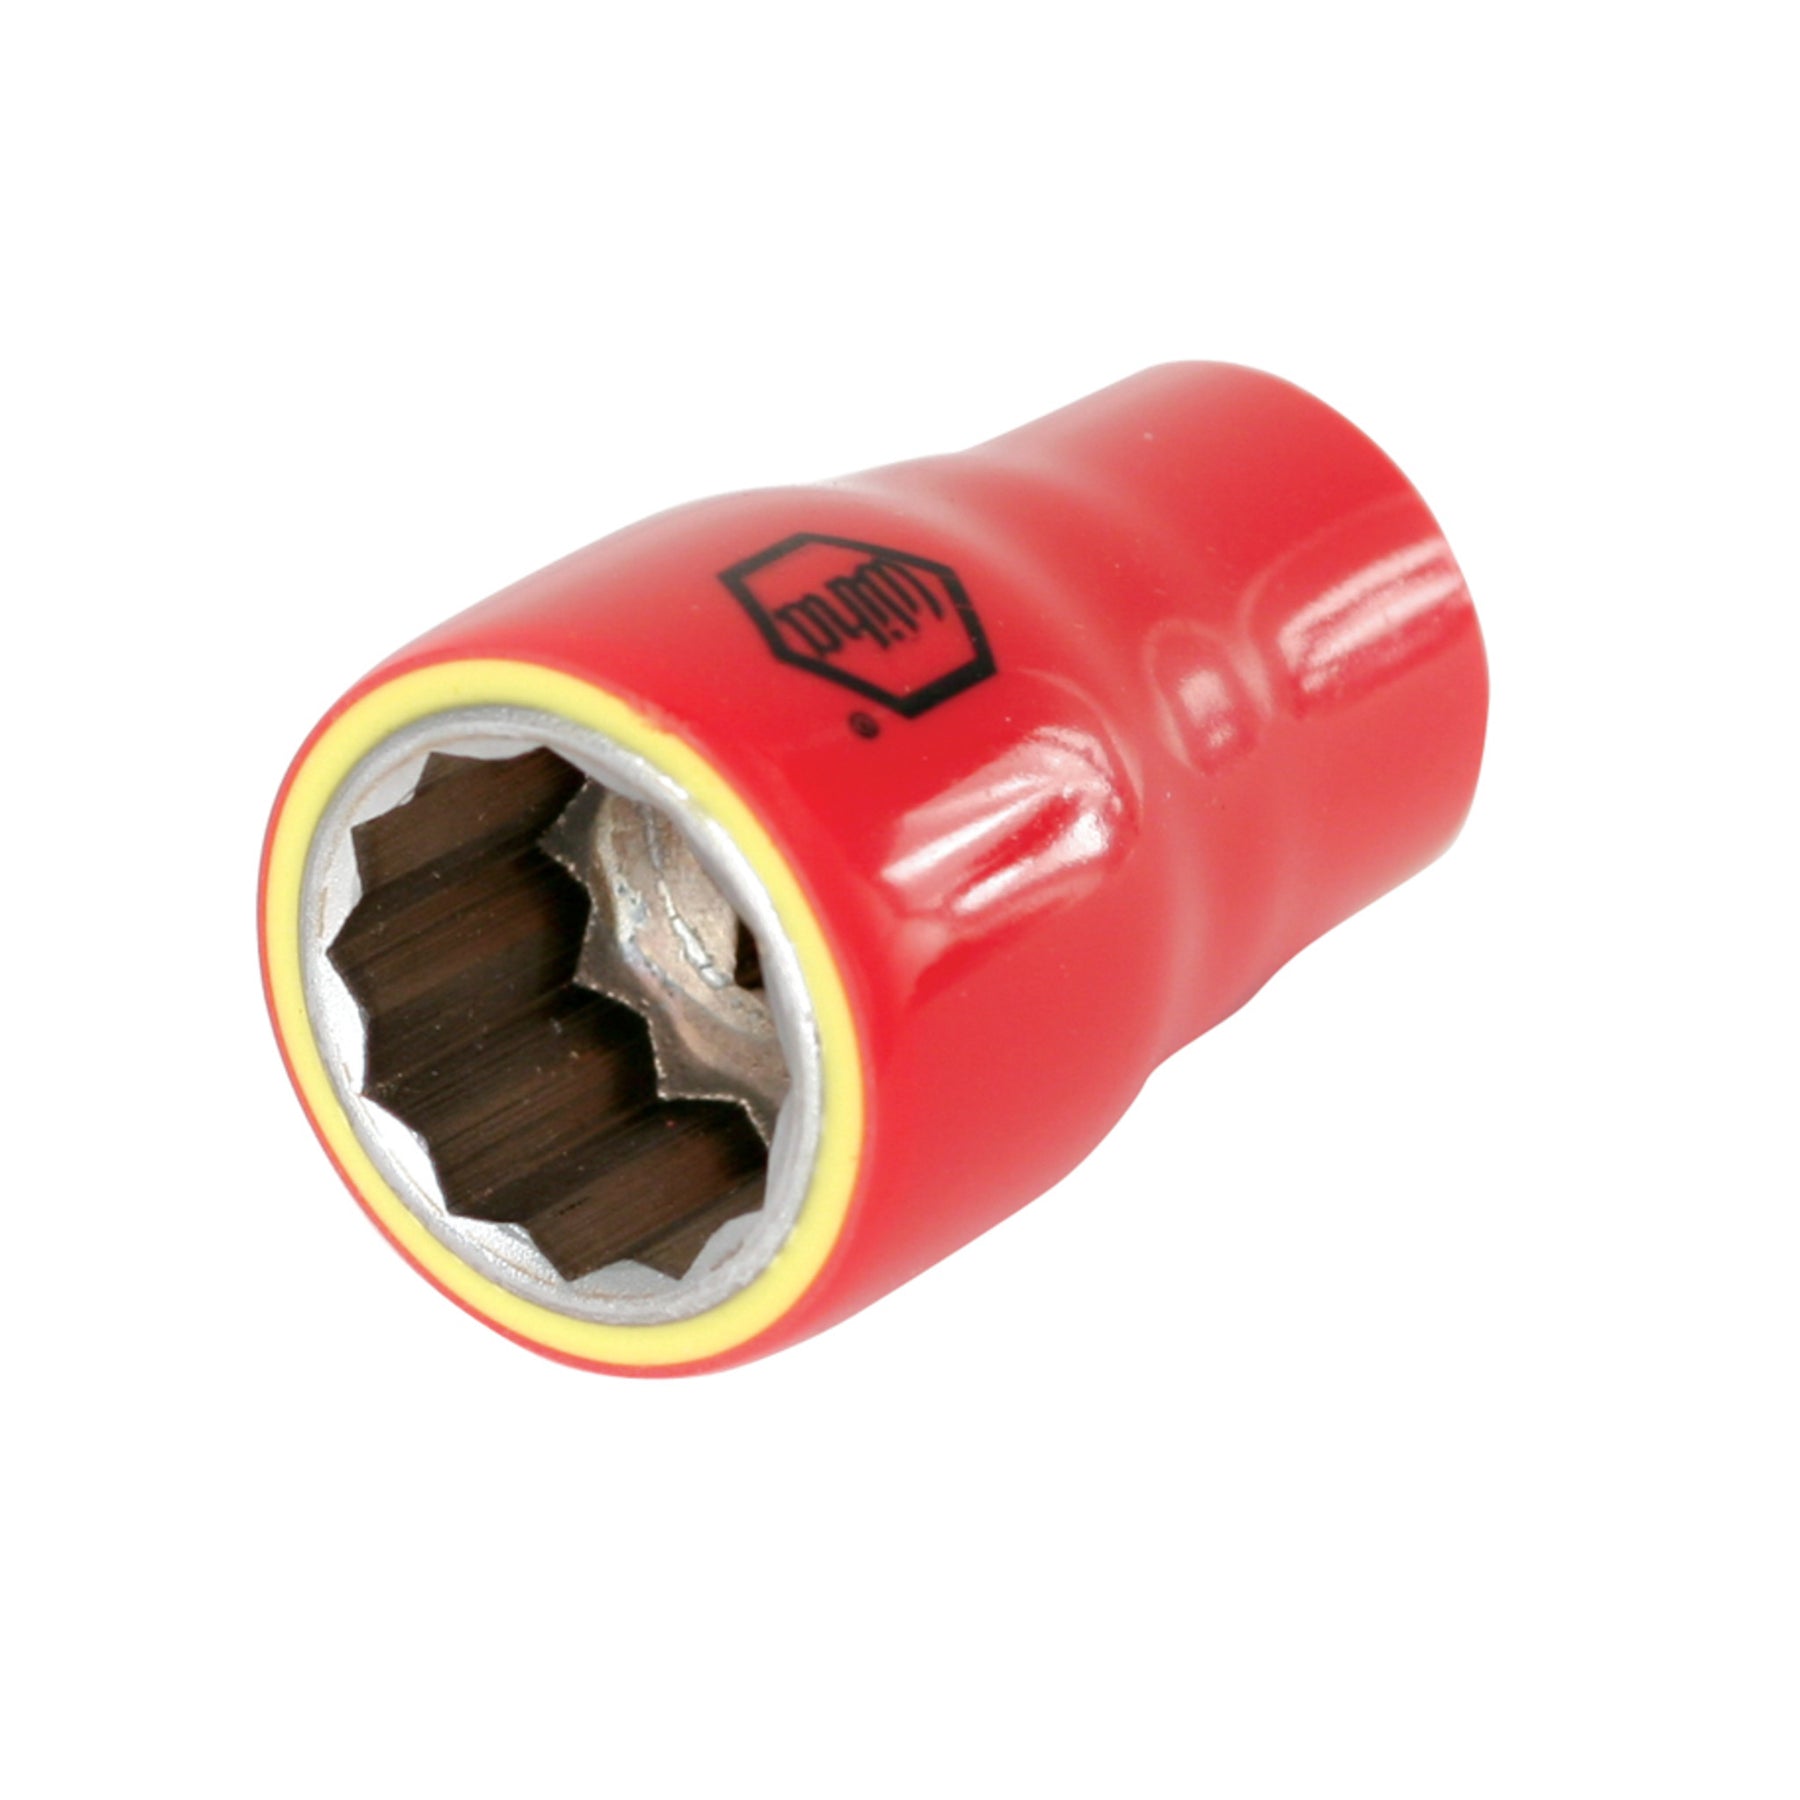 Insulated Socket 1/2" Drive 10mm